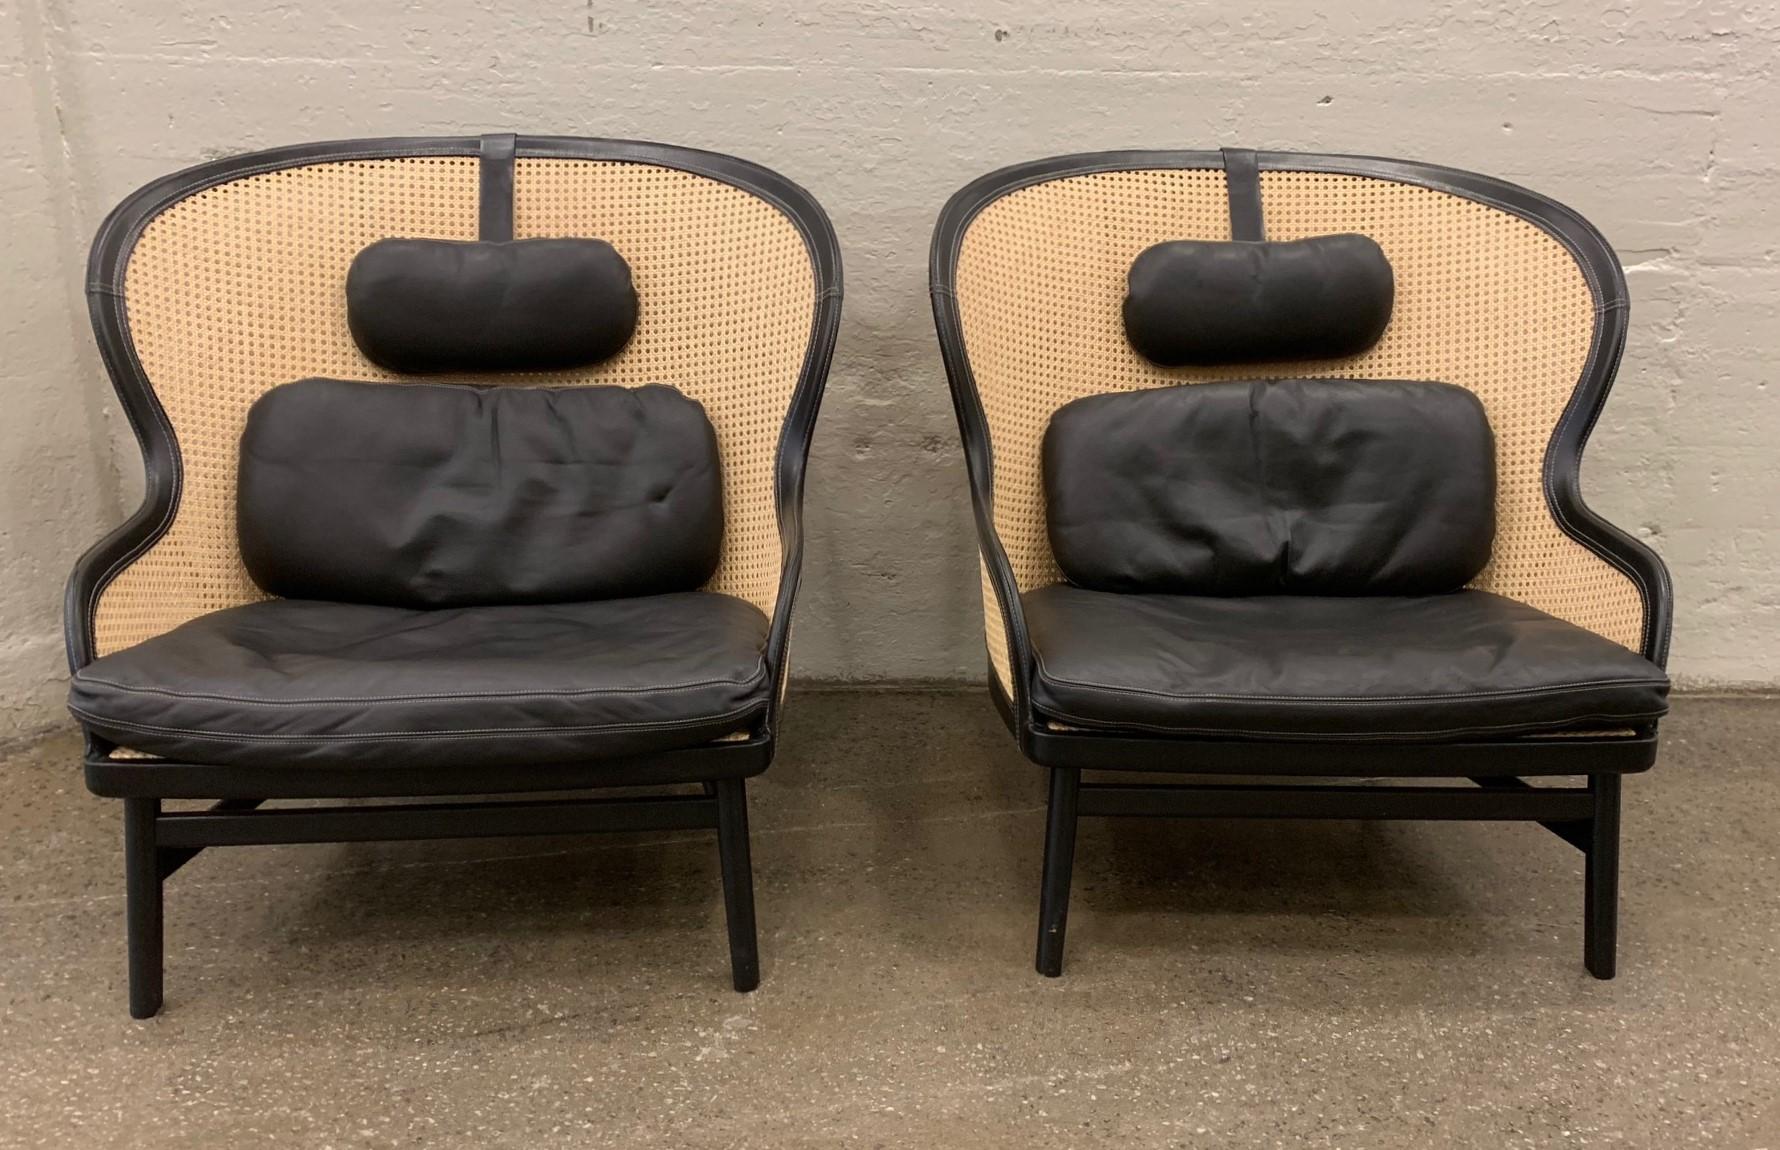 Pair of Danish leather and cane lounge chairs by Pierre Sindre for Garsnas. The chairs have curved backs and the legs are oak and black lacquered. The frame of the chairs is doubled caned and trimmed in leather of Tarnsjo as well as the cushions.